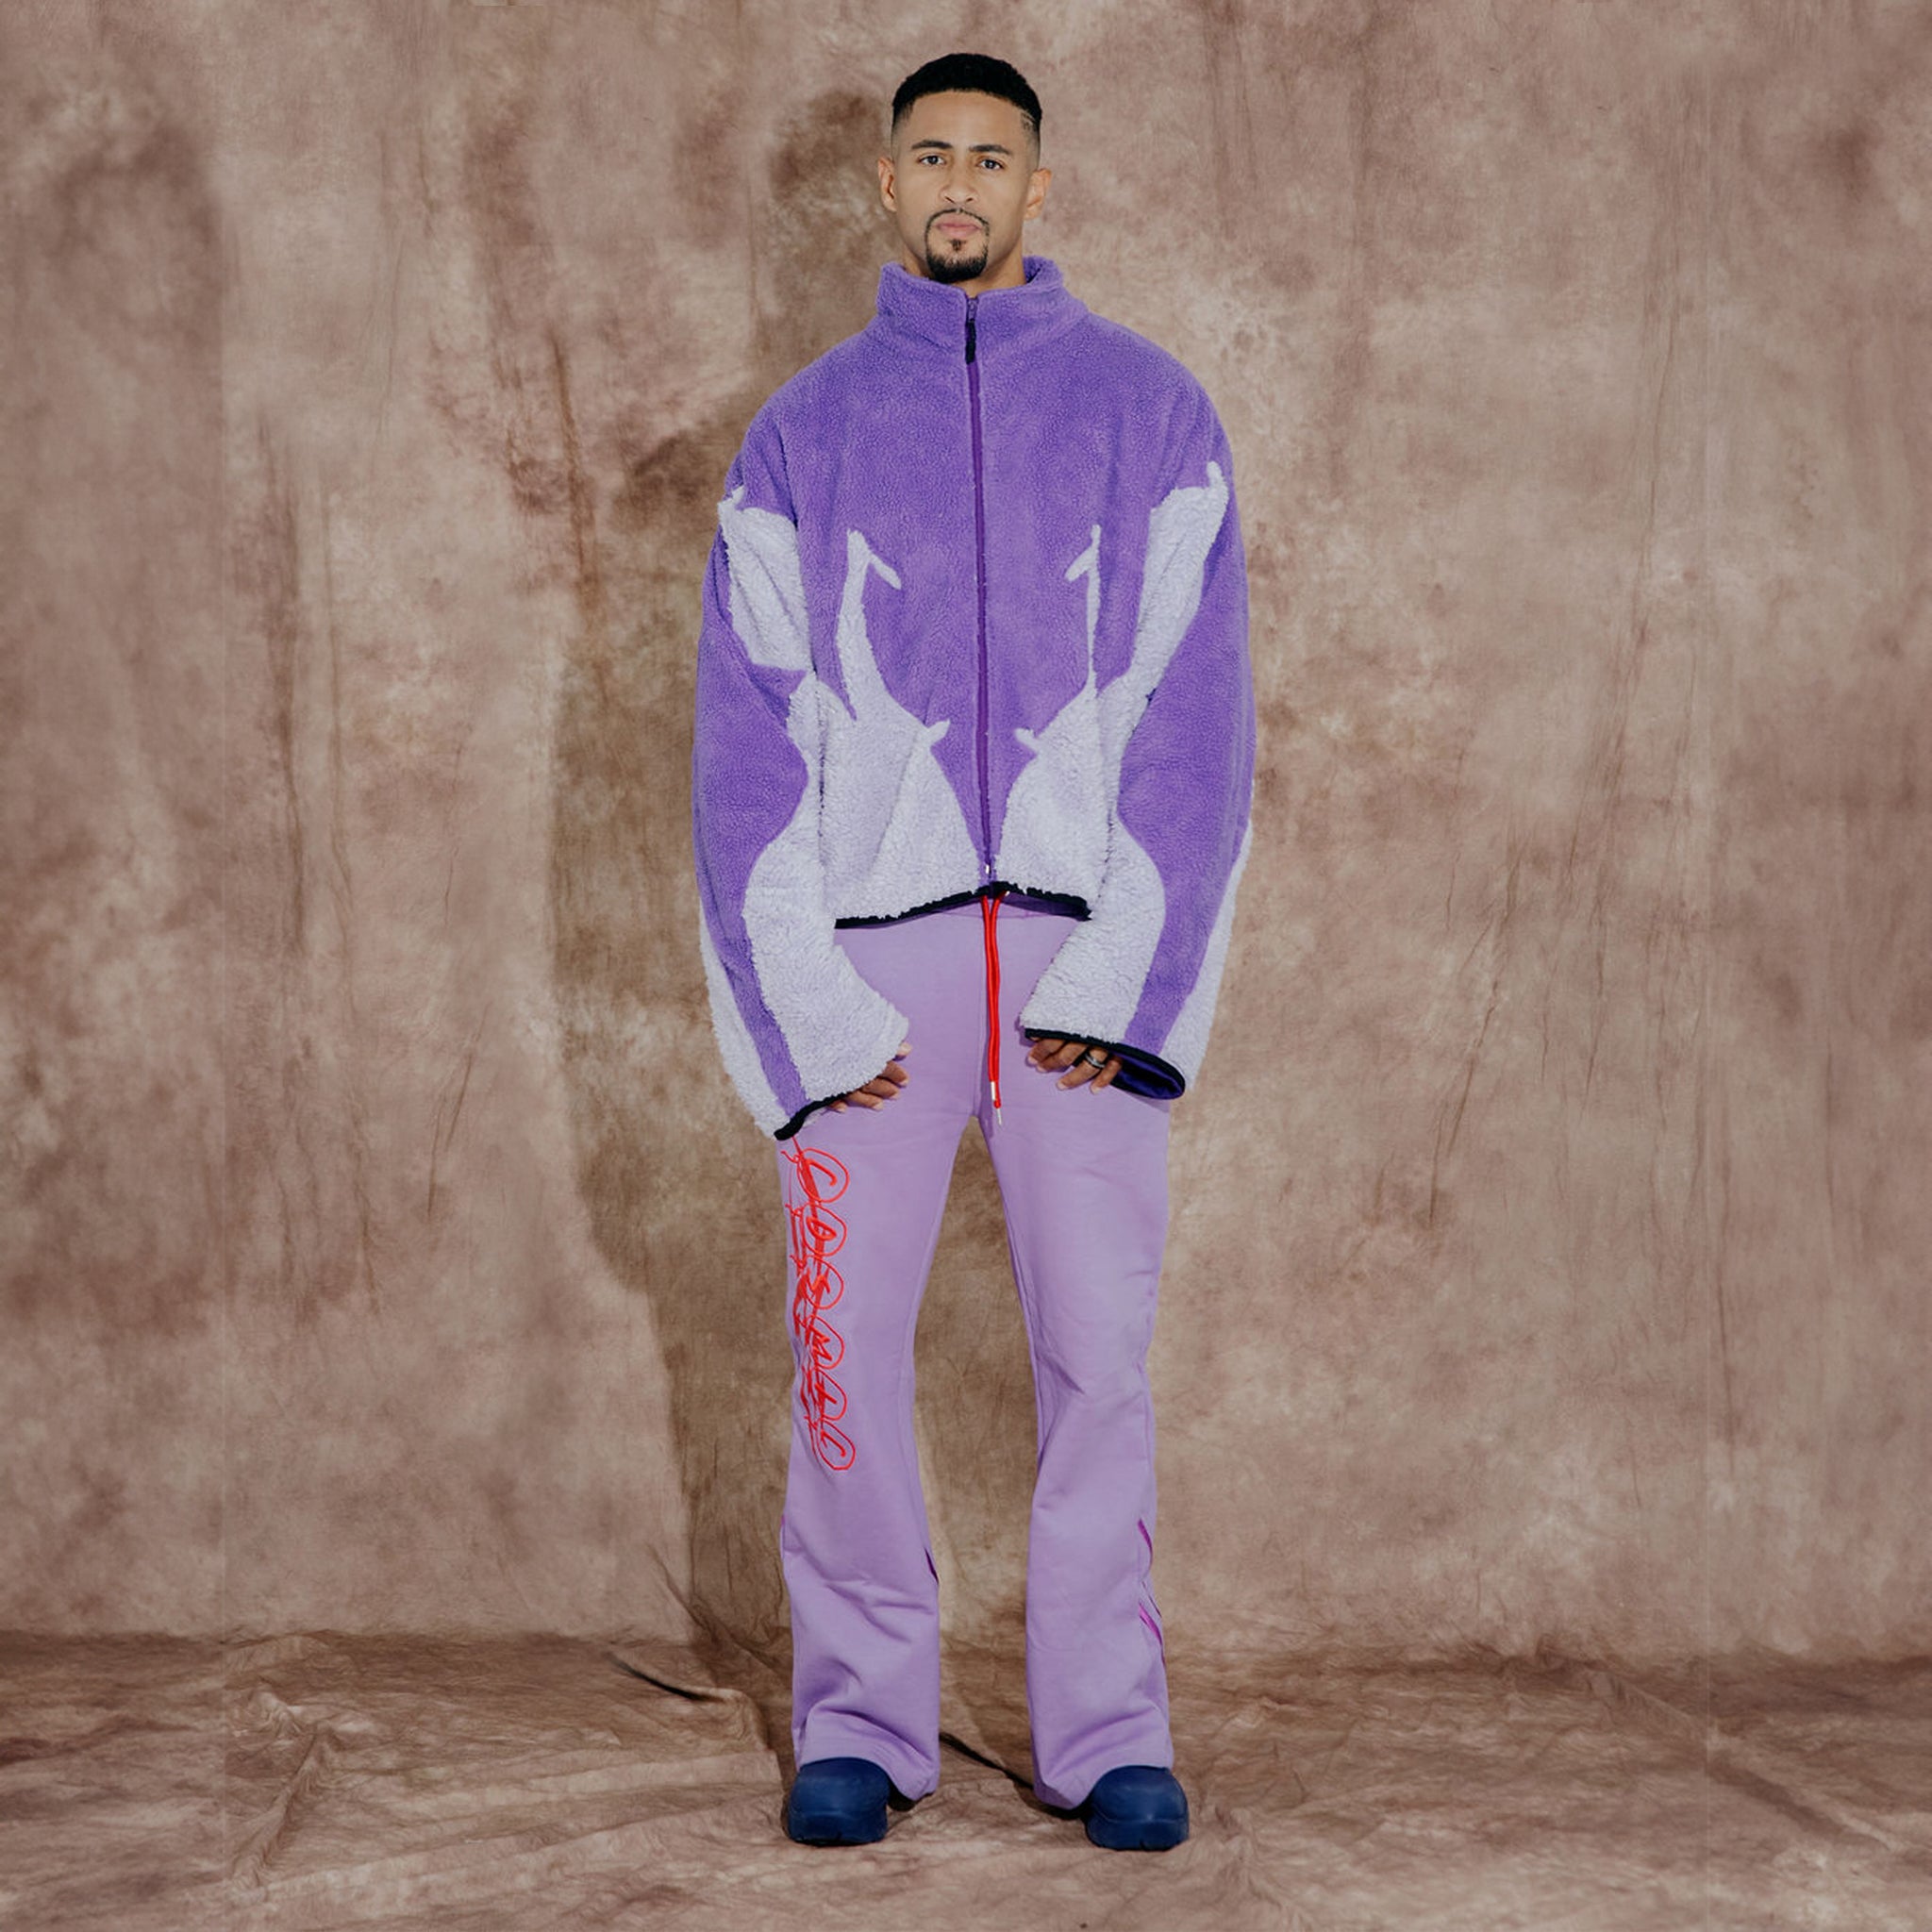 Cosmic the Oasis three-color purple sherpa zip up with extended sleeves can be worn as an oversized shirt layer or outerwear.  Dramatic curved design with Cosmic logo across the back.